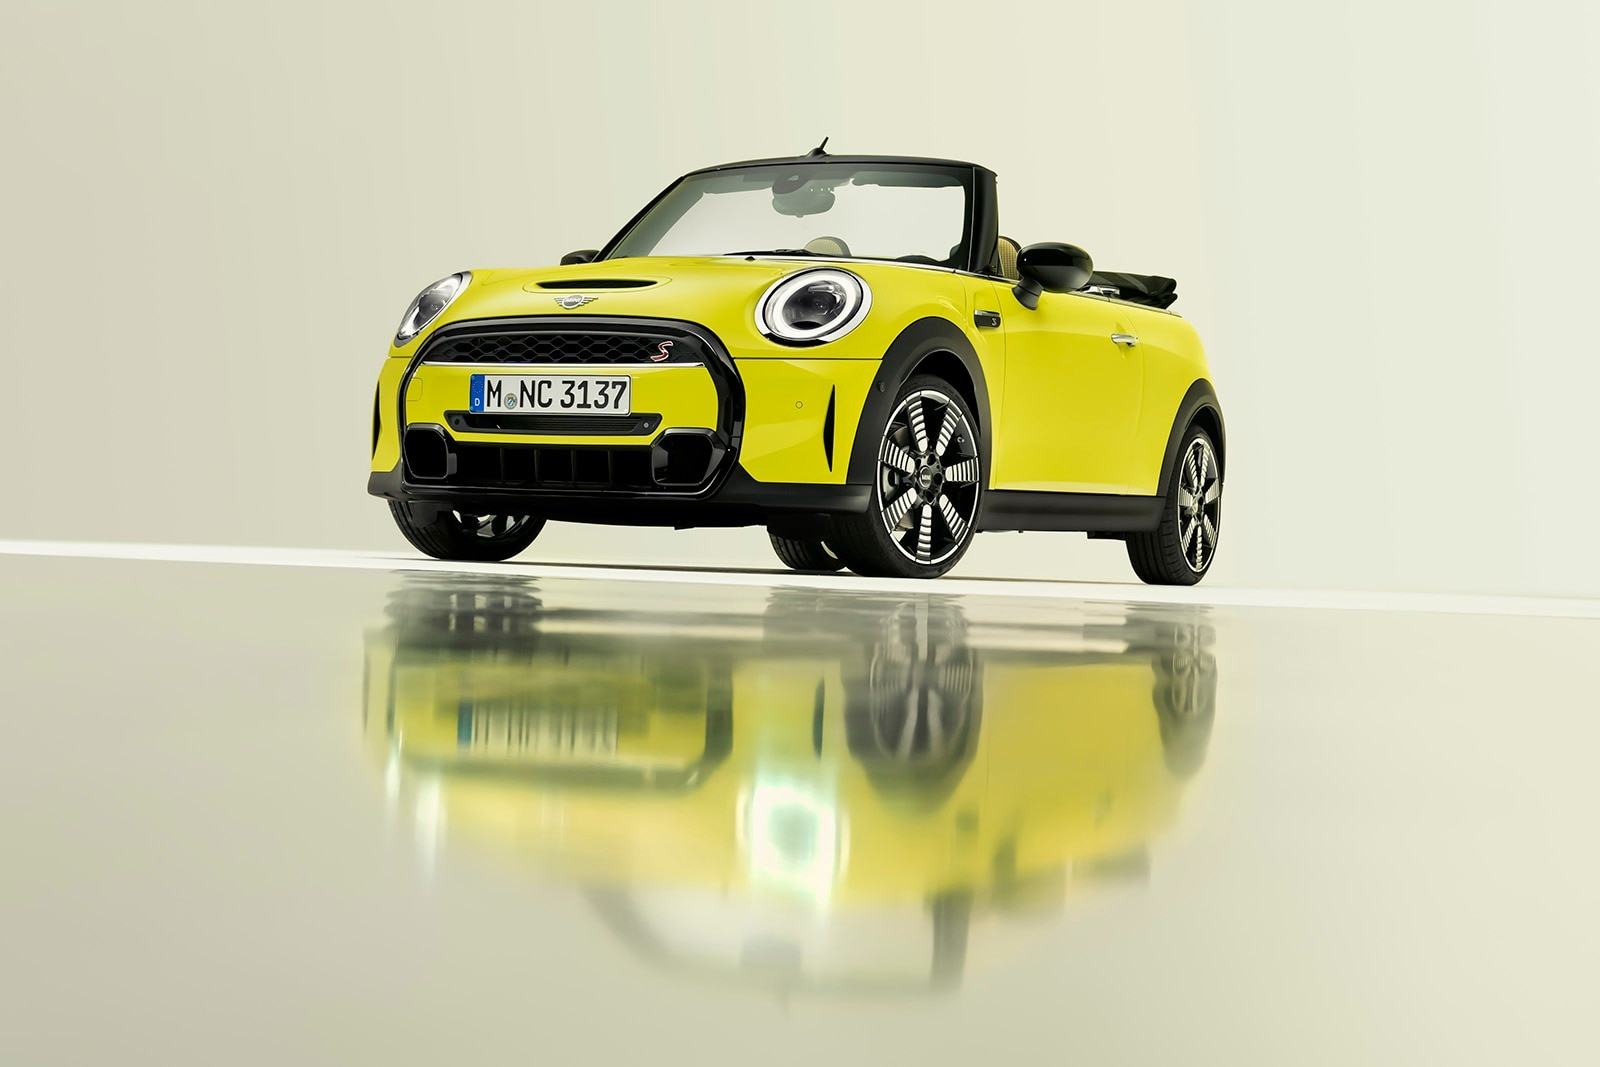 Refreshed 2022 Mini Convertible Is Like the Refreshed Mini Hardtop 2 Door, but With a Soft Top